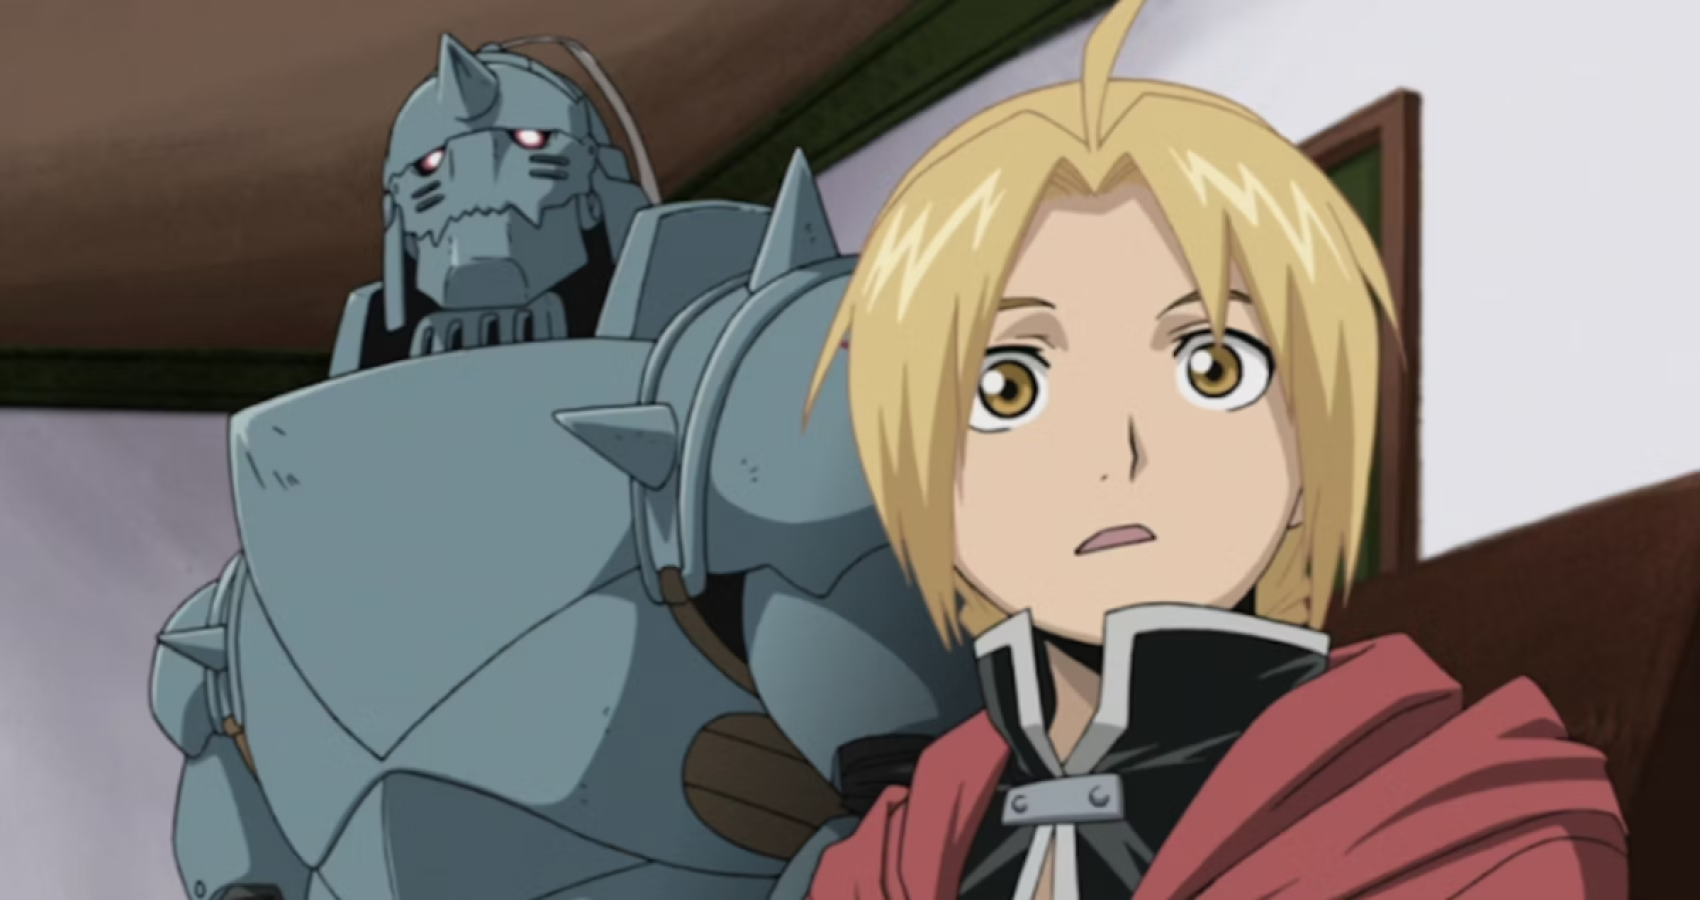 Brothers Edward and Alphonse Elric as they appear in the 2003 Fullmetal Alchemist anime